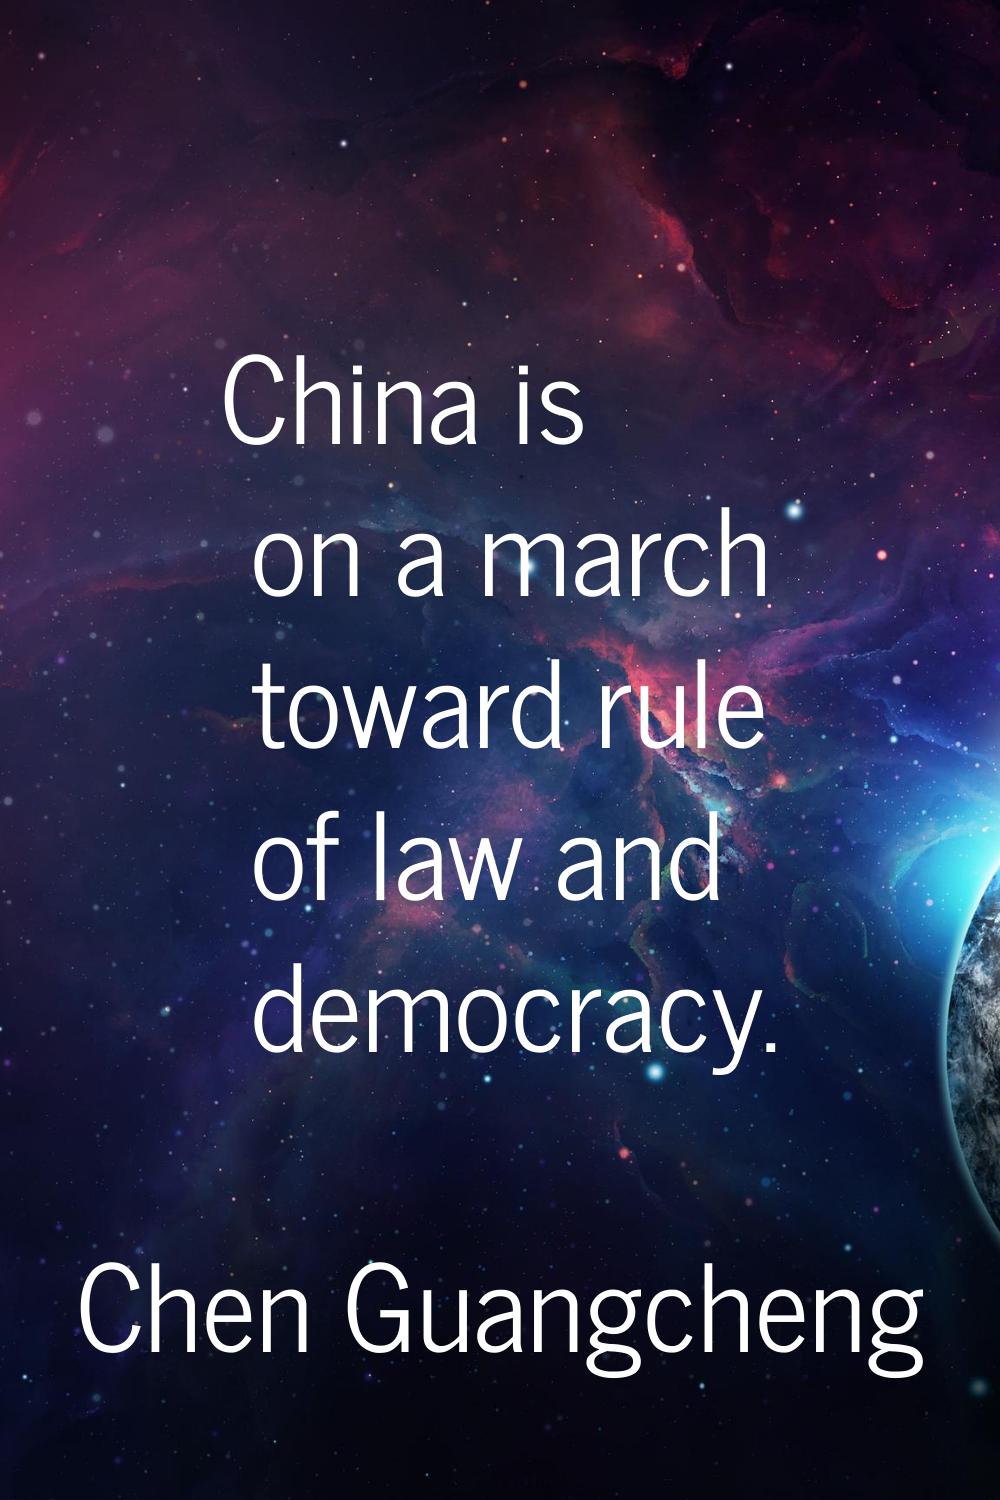 China is on a march toward rule of law and democracy.